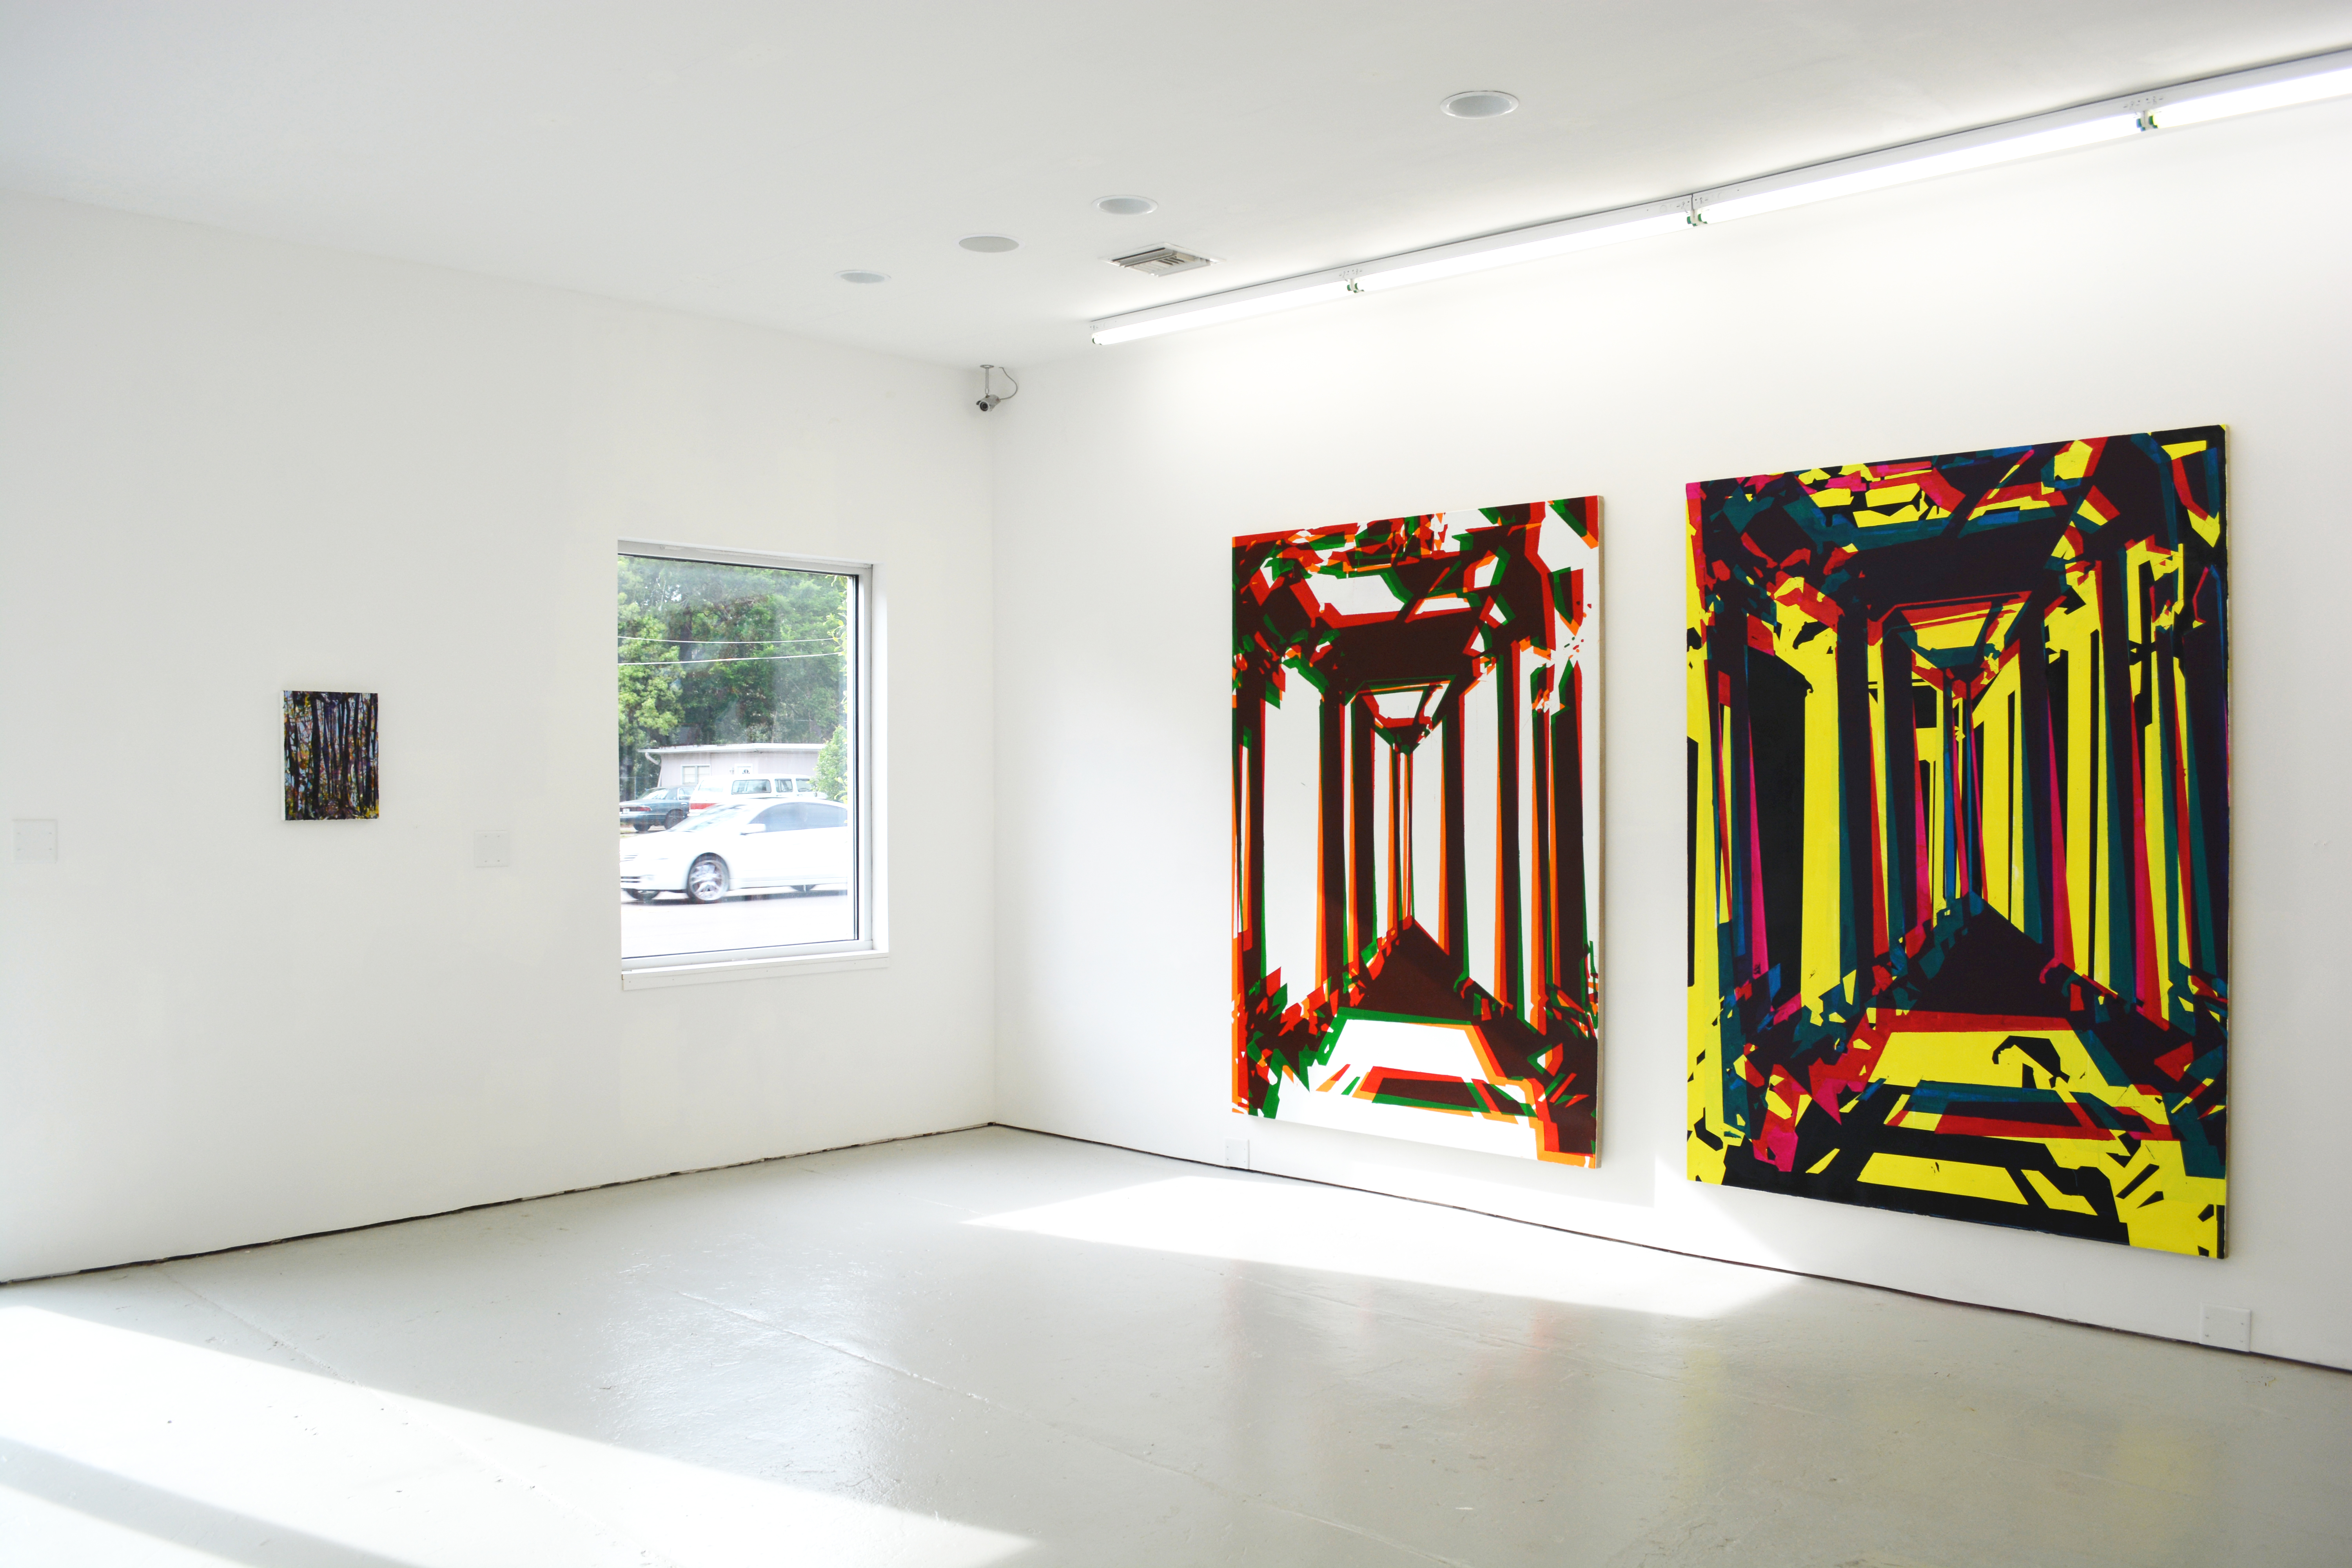 Jered Sprecher, Installation shot of "The Hollow That Echoes (left to right): The Hollow That Echoes, 2015, oil on linen, 16 by 12 inches; Minding, 2011, oil on linen, 84 by 60 inches; & Nature of Nature, 2011, oil on linen, 84 by 60 inches. 